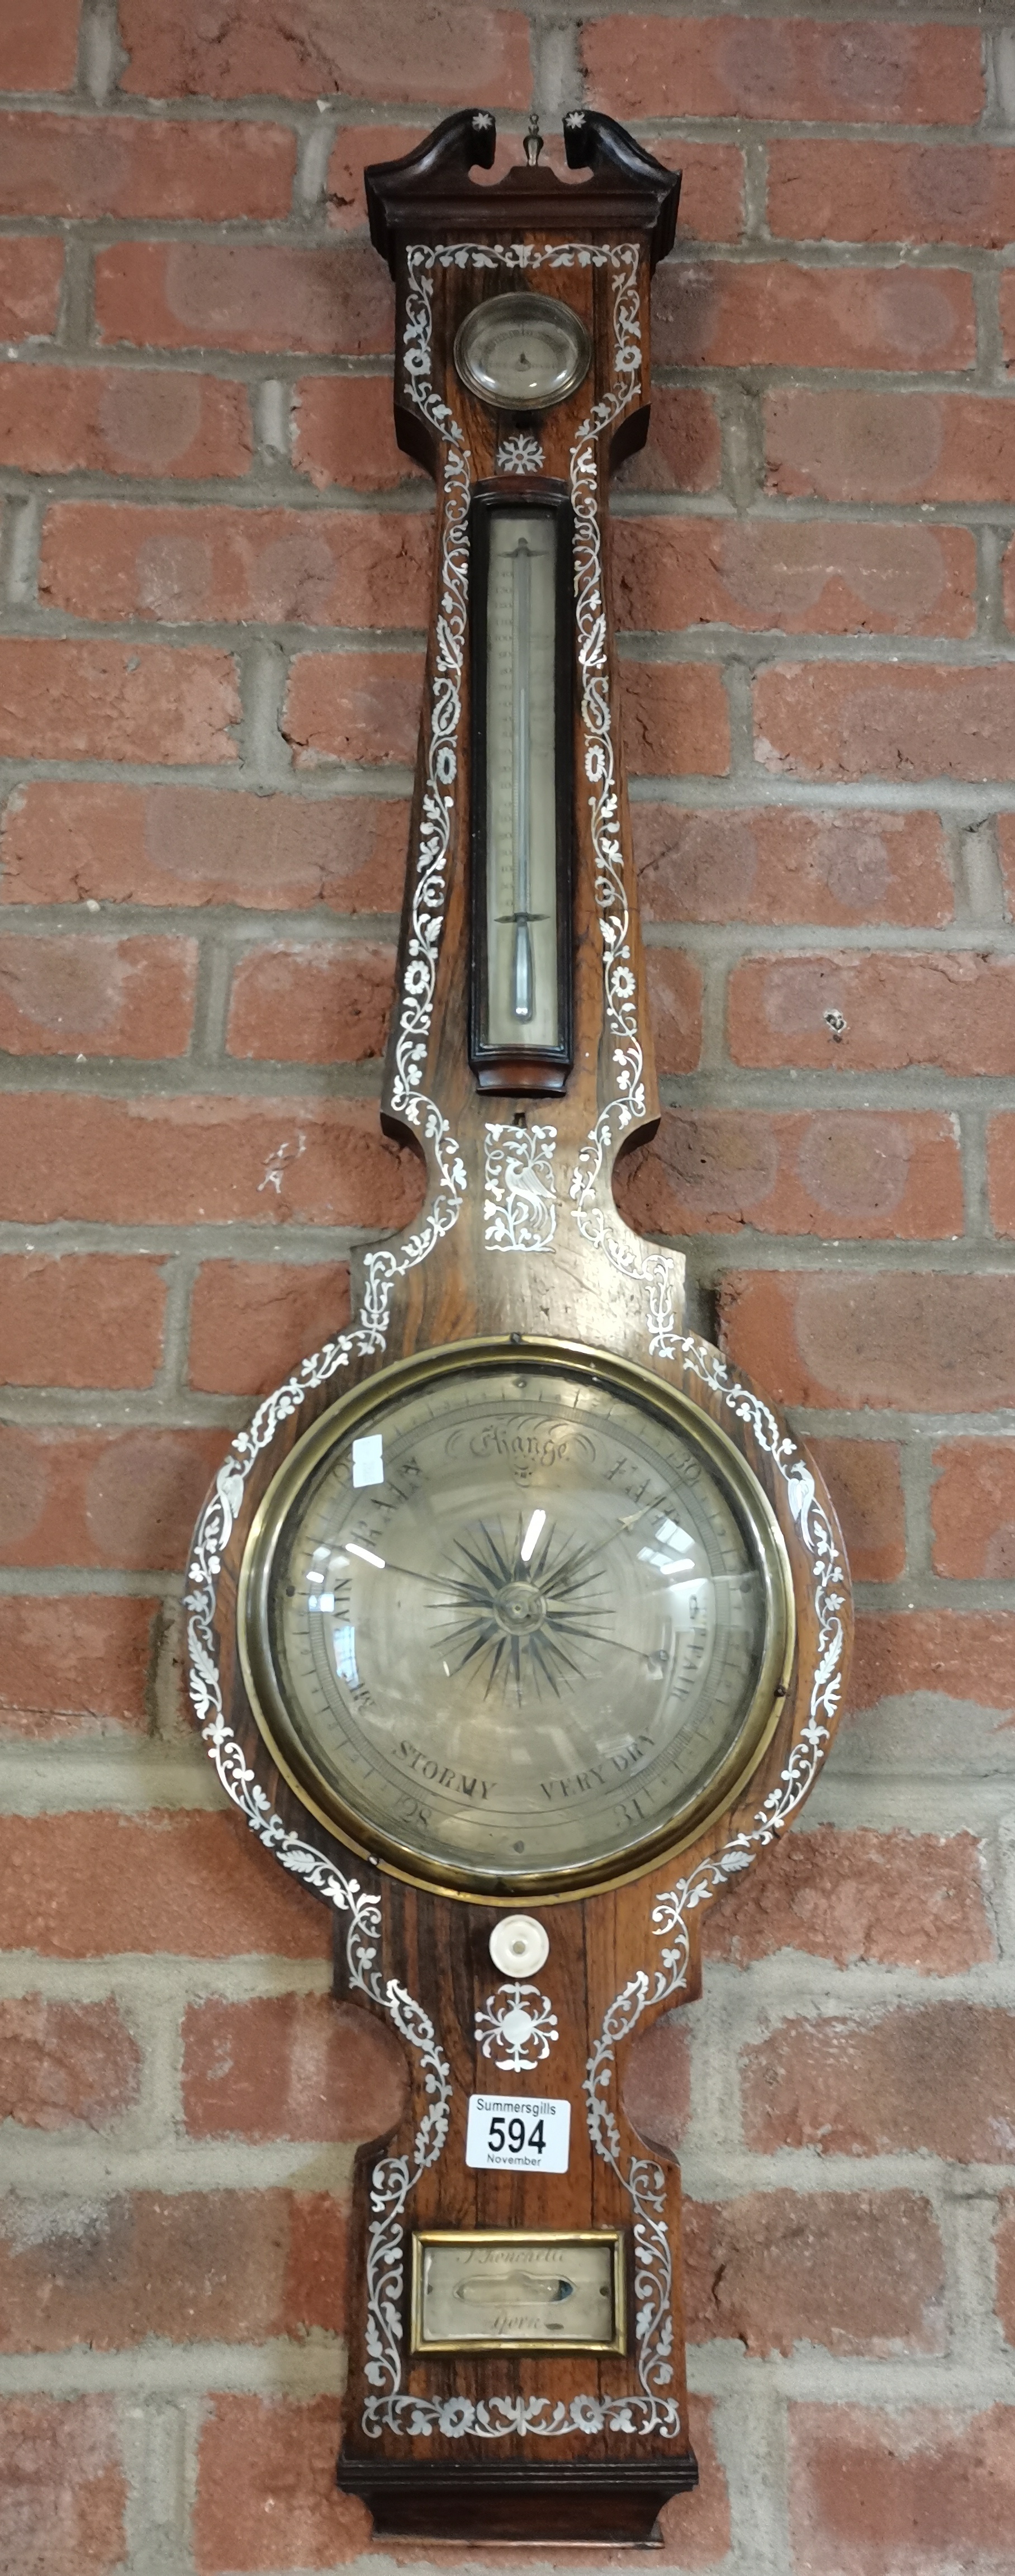 An Antique rosewood and mother of pearl barometer. J~Bonchelli York